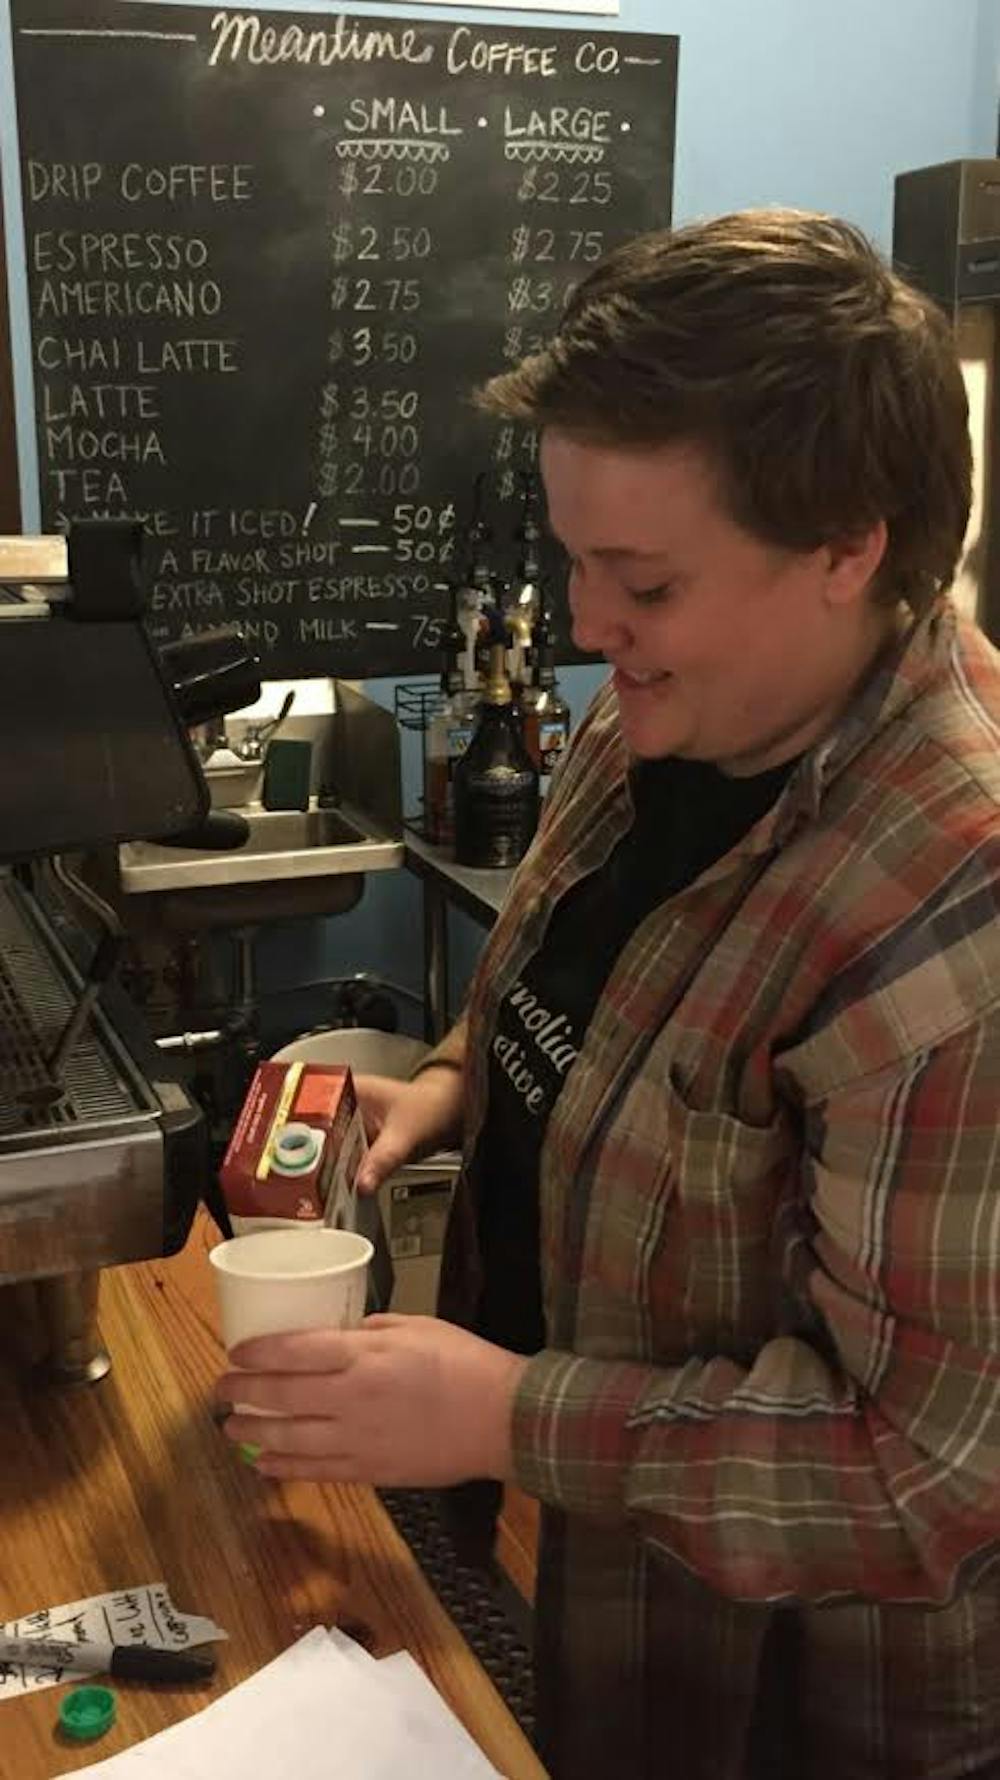 Hannah Hodge, 20, a junior&nbsp;women's and gender studies major, was making a customer's coffee at the Meantime Cafe.&nbsp;